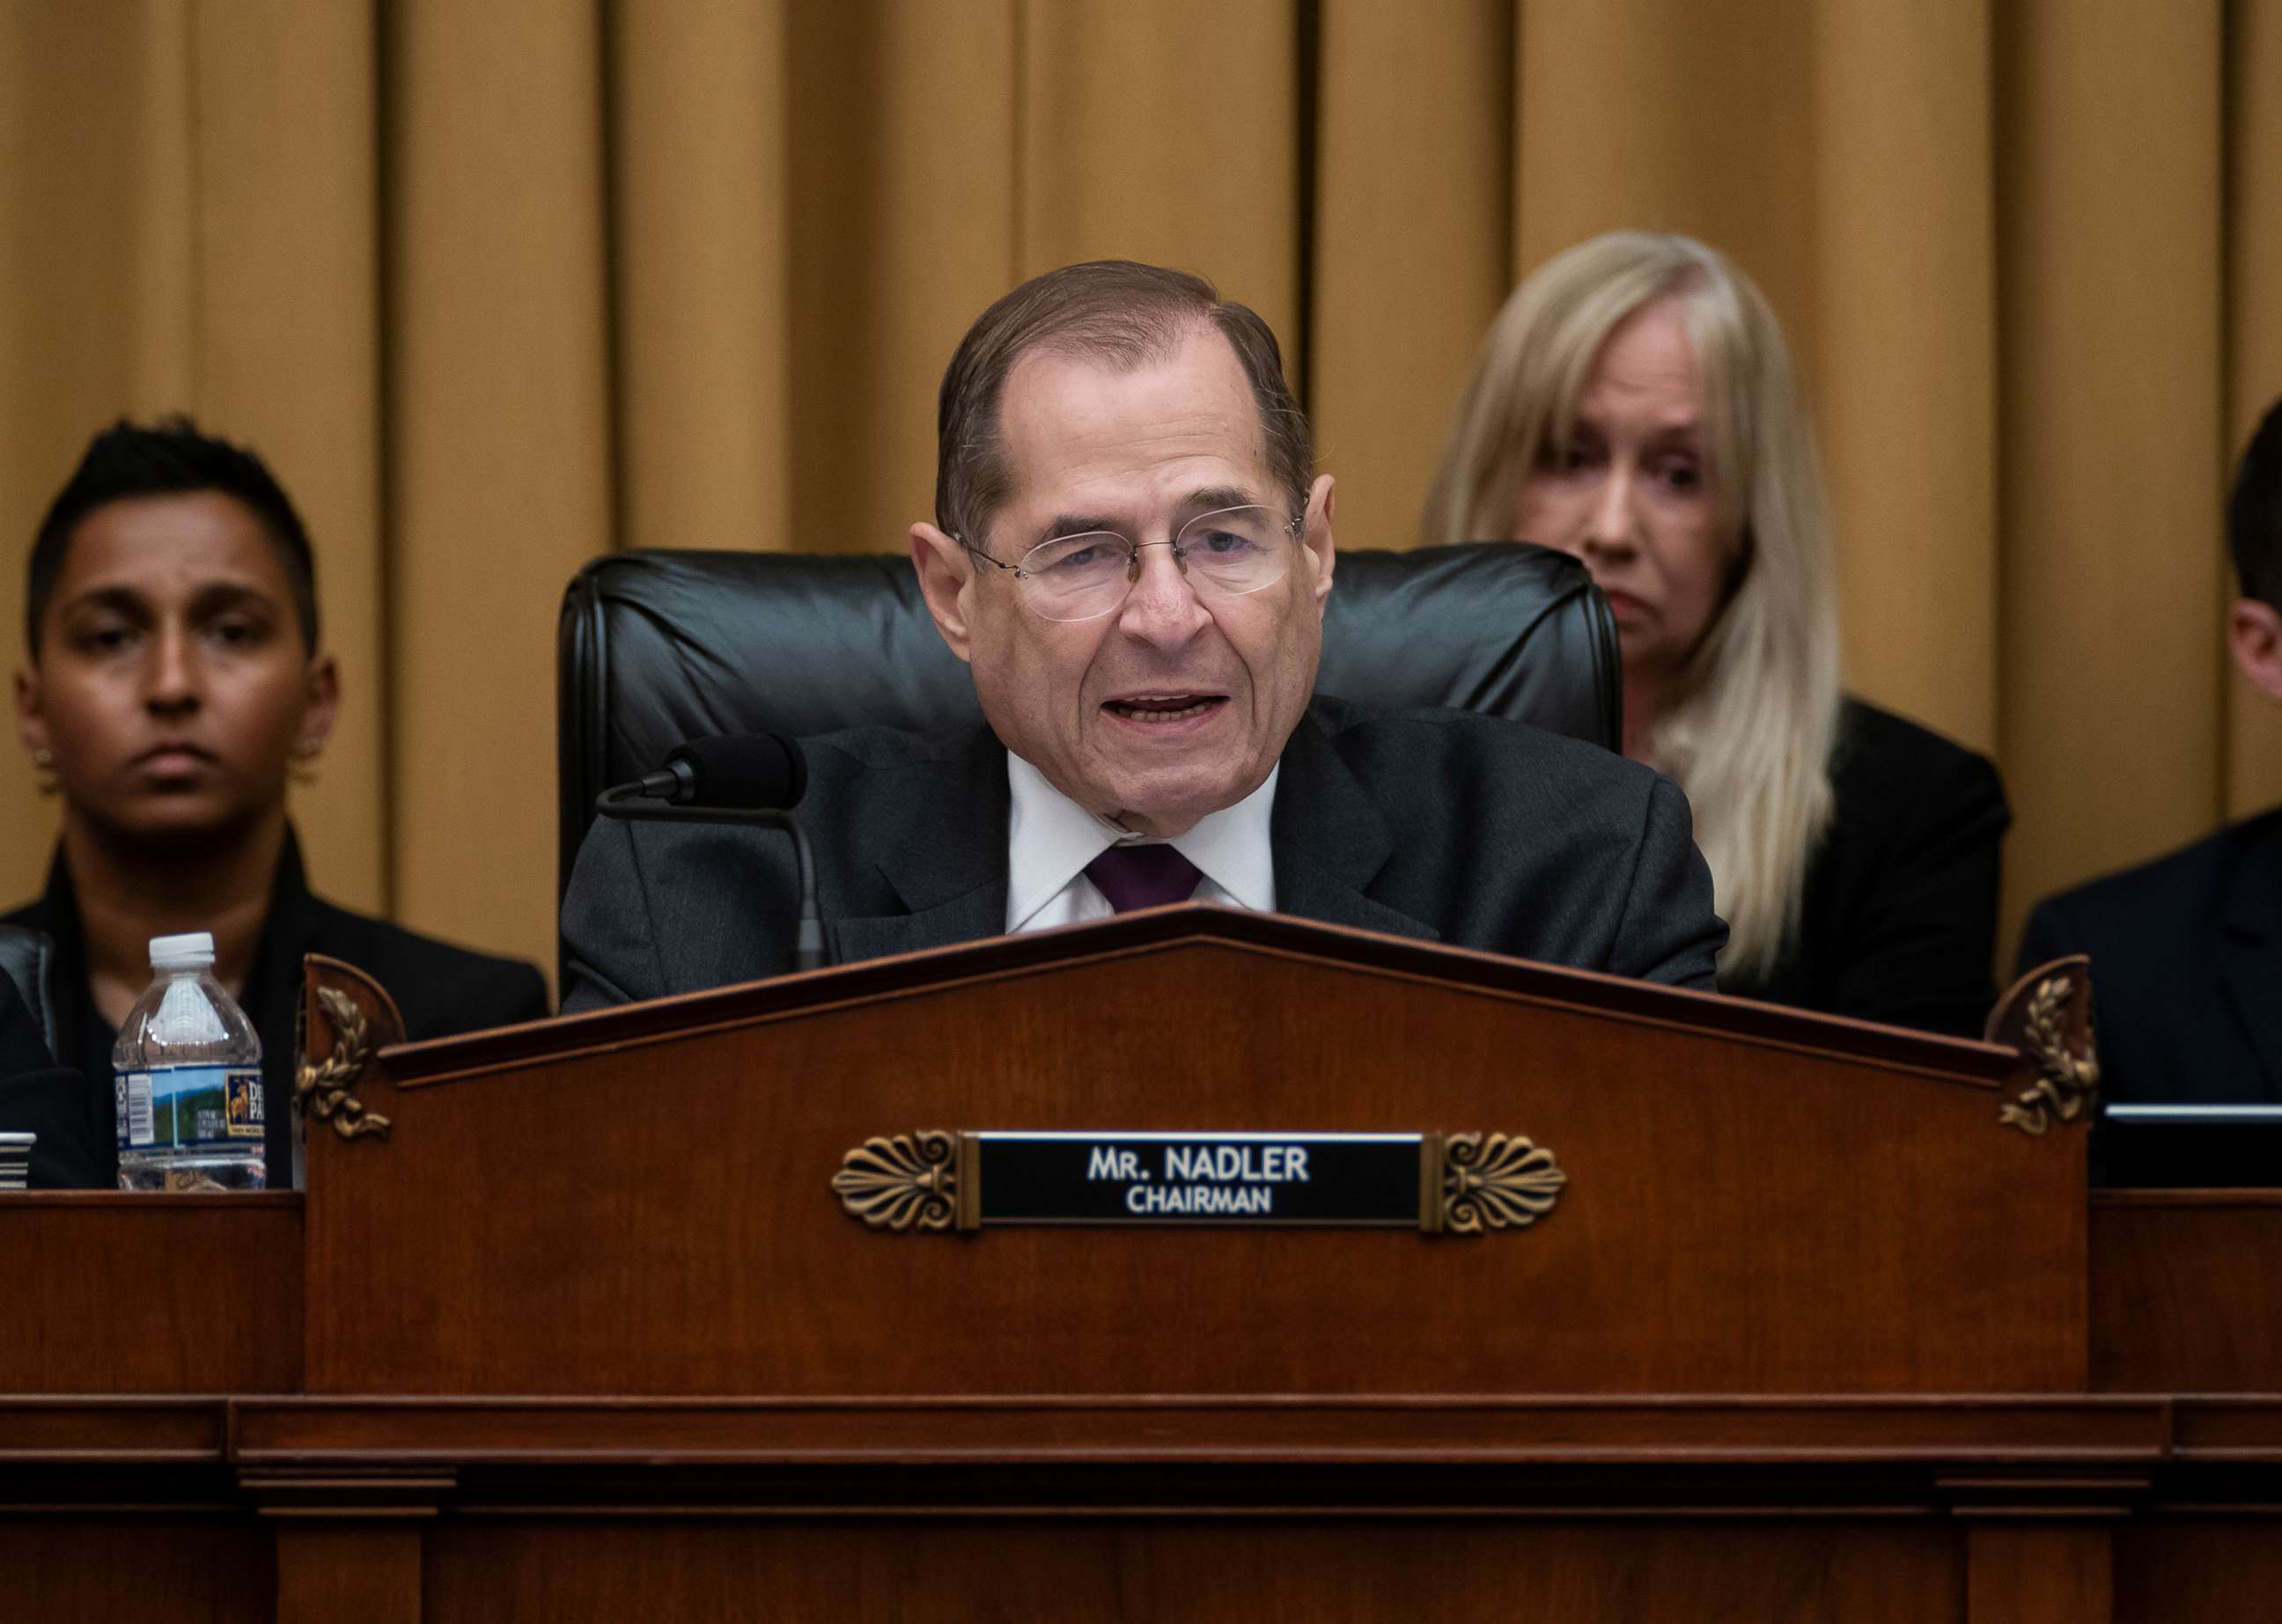 PHOTO: House Judiciary Committee Chairman, Rep. Jerrold Nadler, makes an opening statement as House Democrats start their hearing to examine whether President Donald Trump obstructed justice, on Capitol Hill in Washington, June 10, 2019.